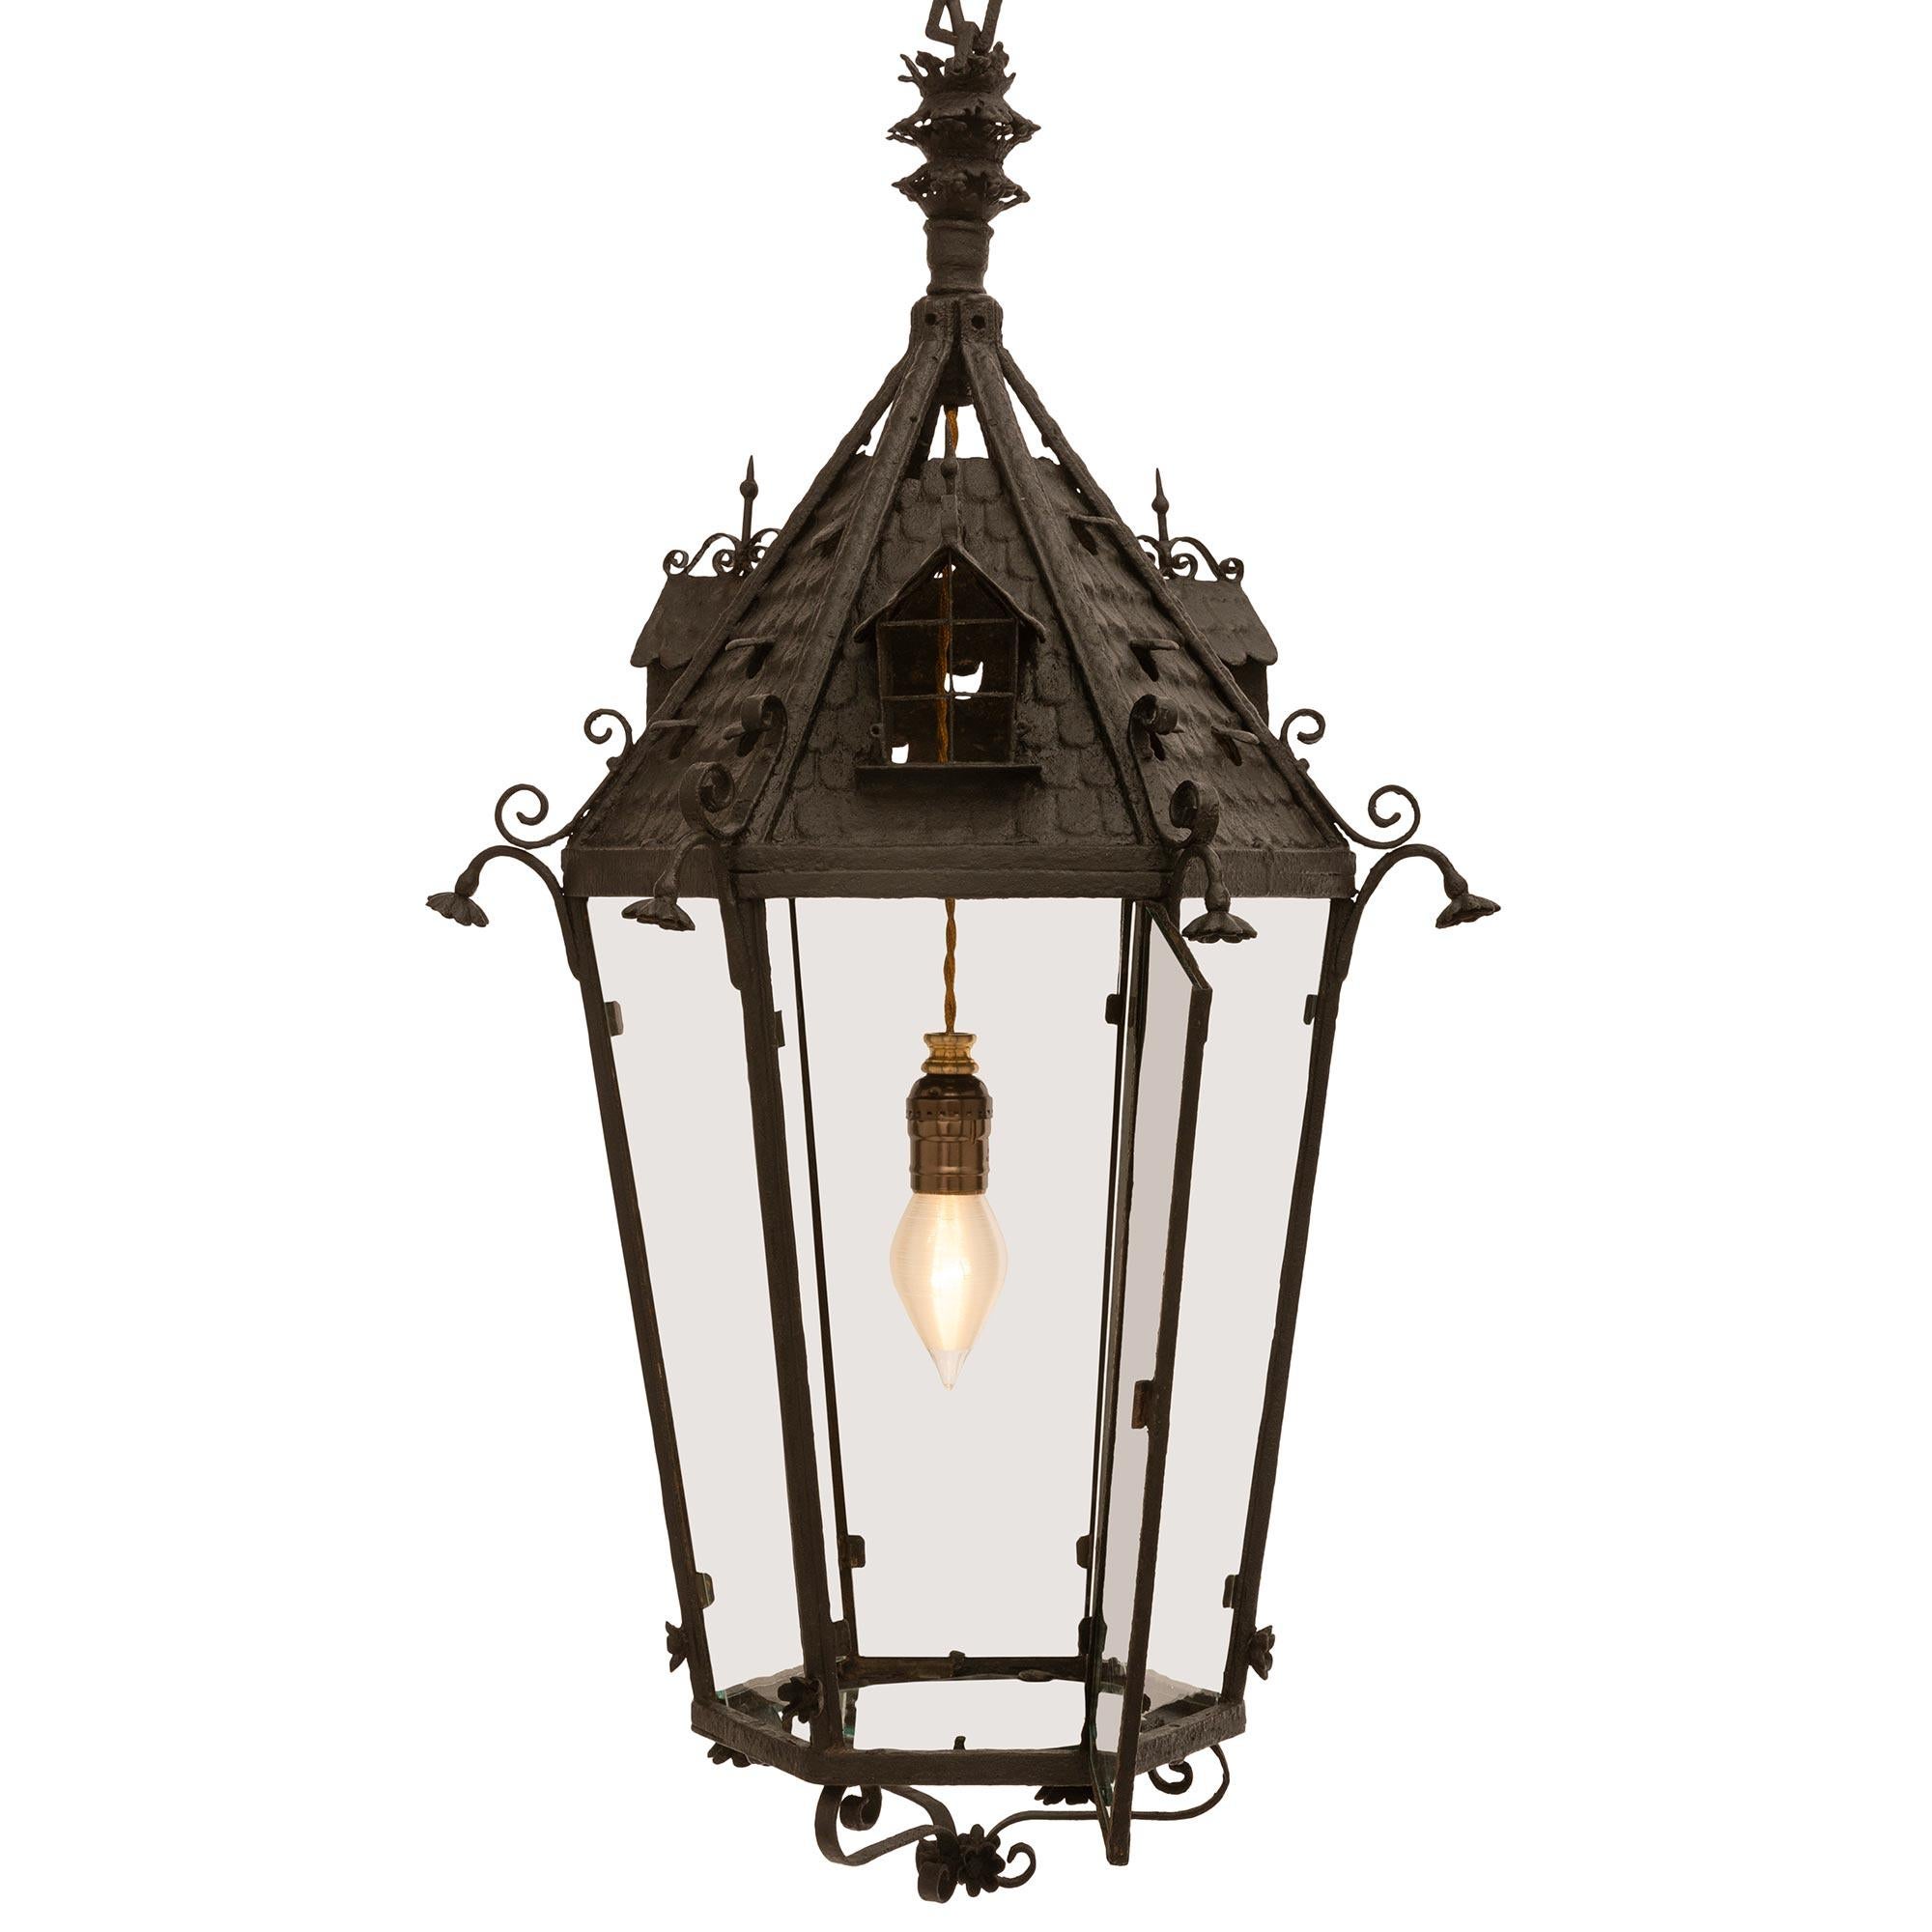 A very decorative and unique French 19th century Wrought Iron lantern. The bottom of the hexagon shaped lantern is elegantly decorated by elongated 'S' scrolls leading to the bottom of the tapered hexagon frame of the lantern with flower like